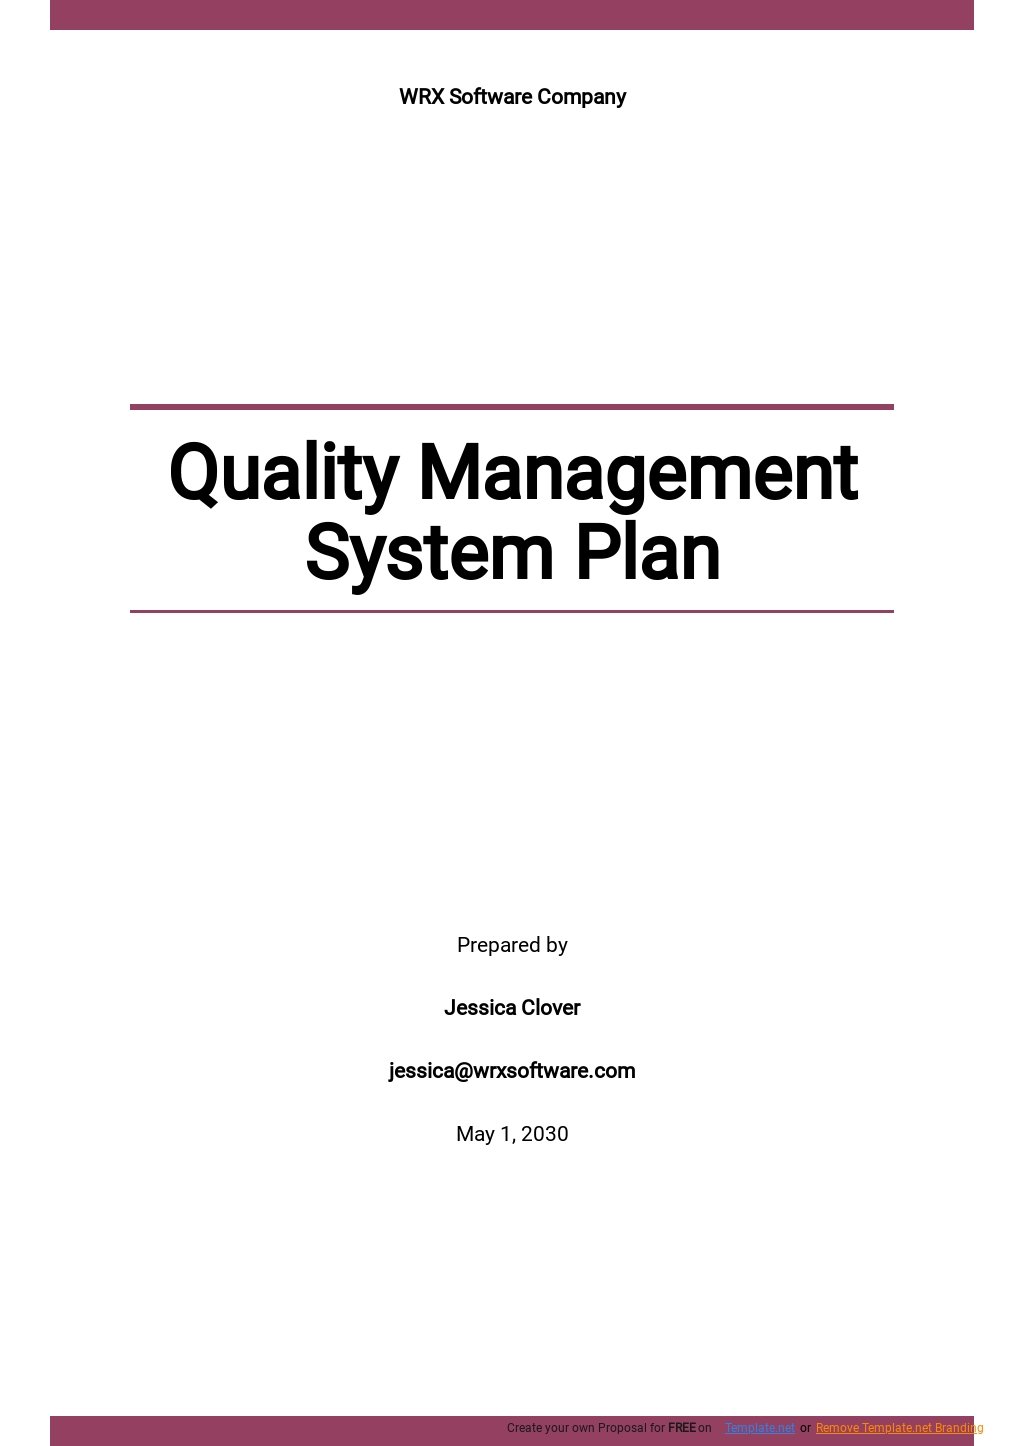 Quality Management System Plan Template Google Docs Word Apple